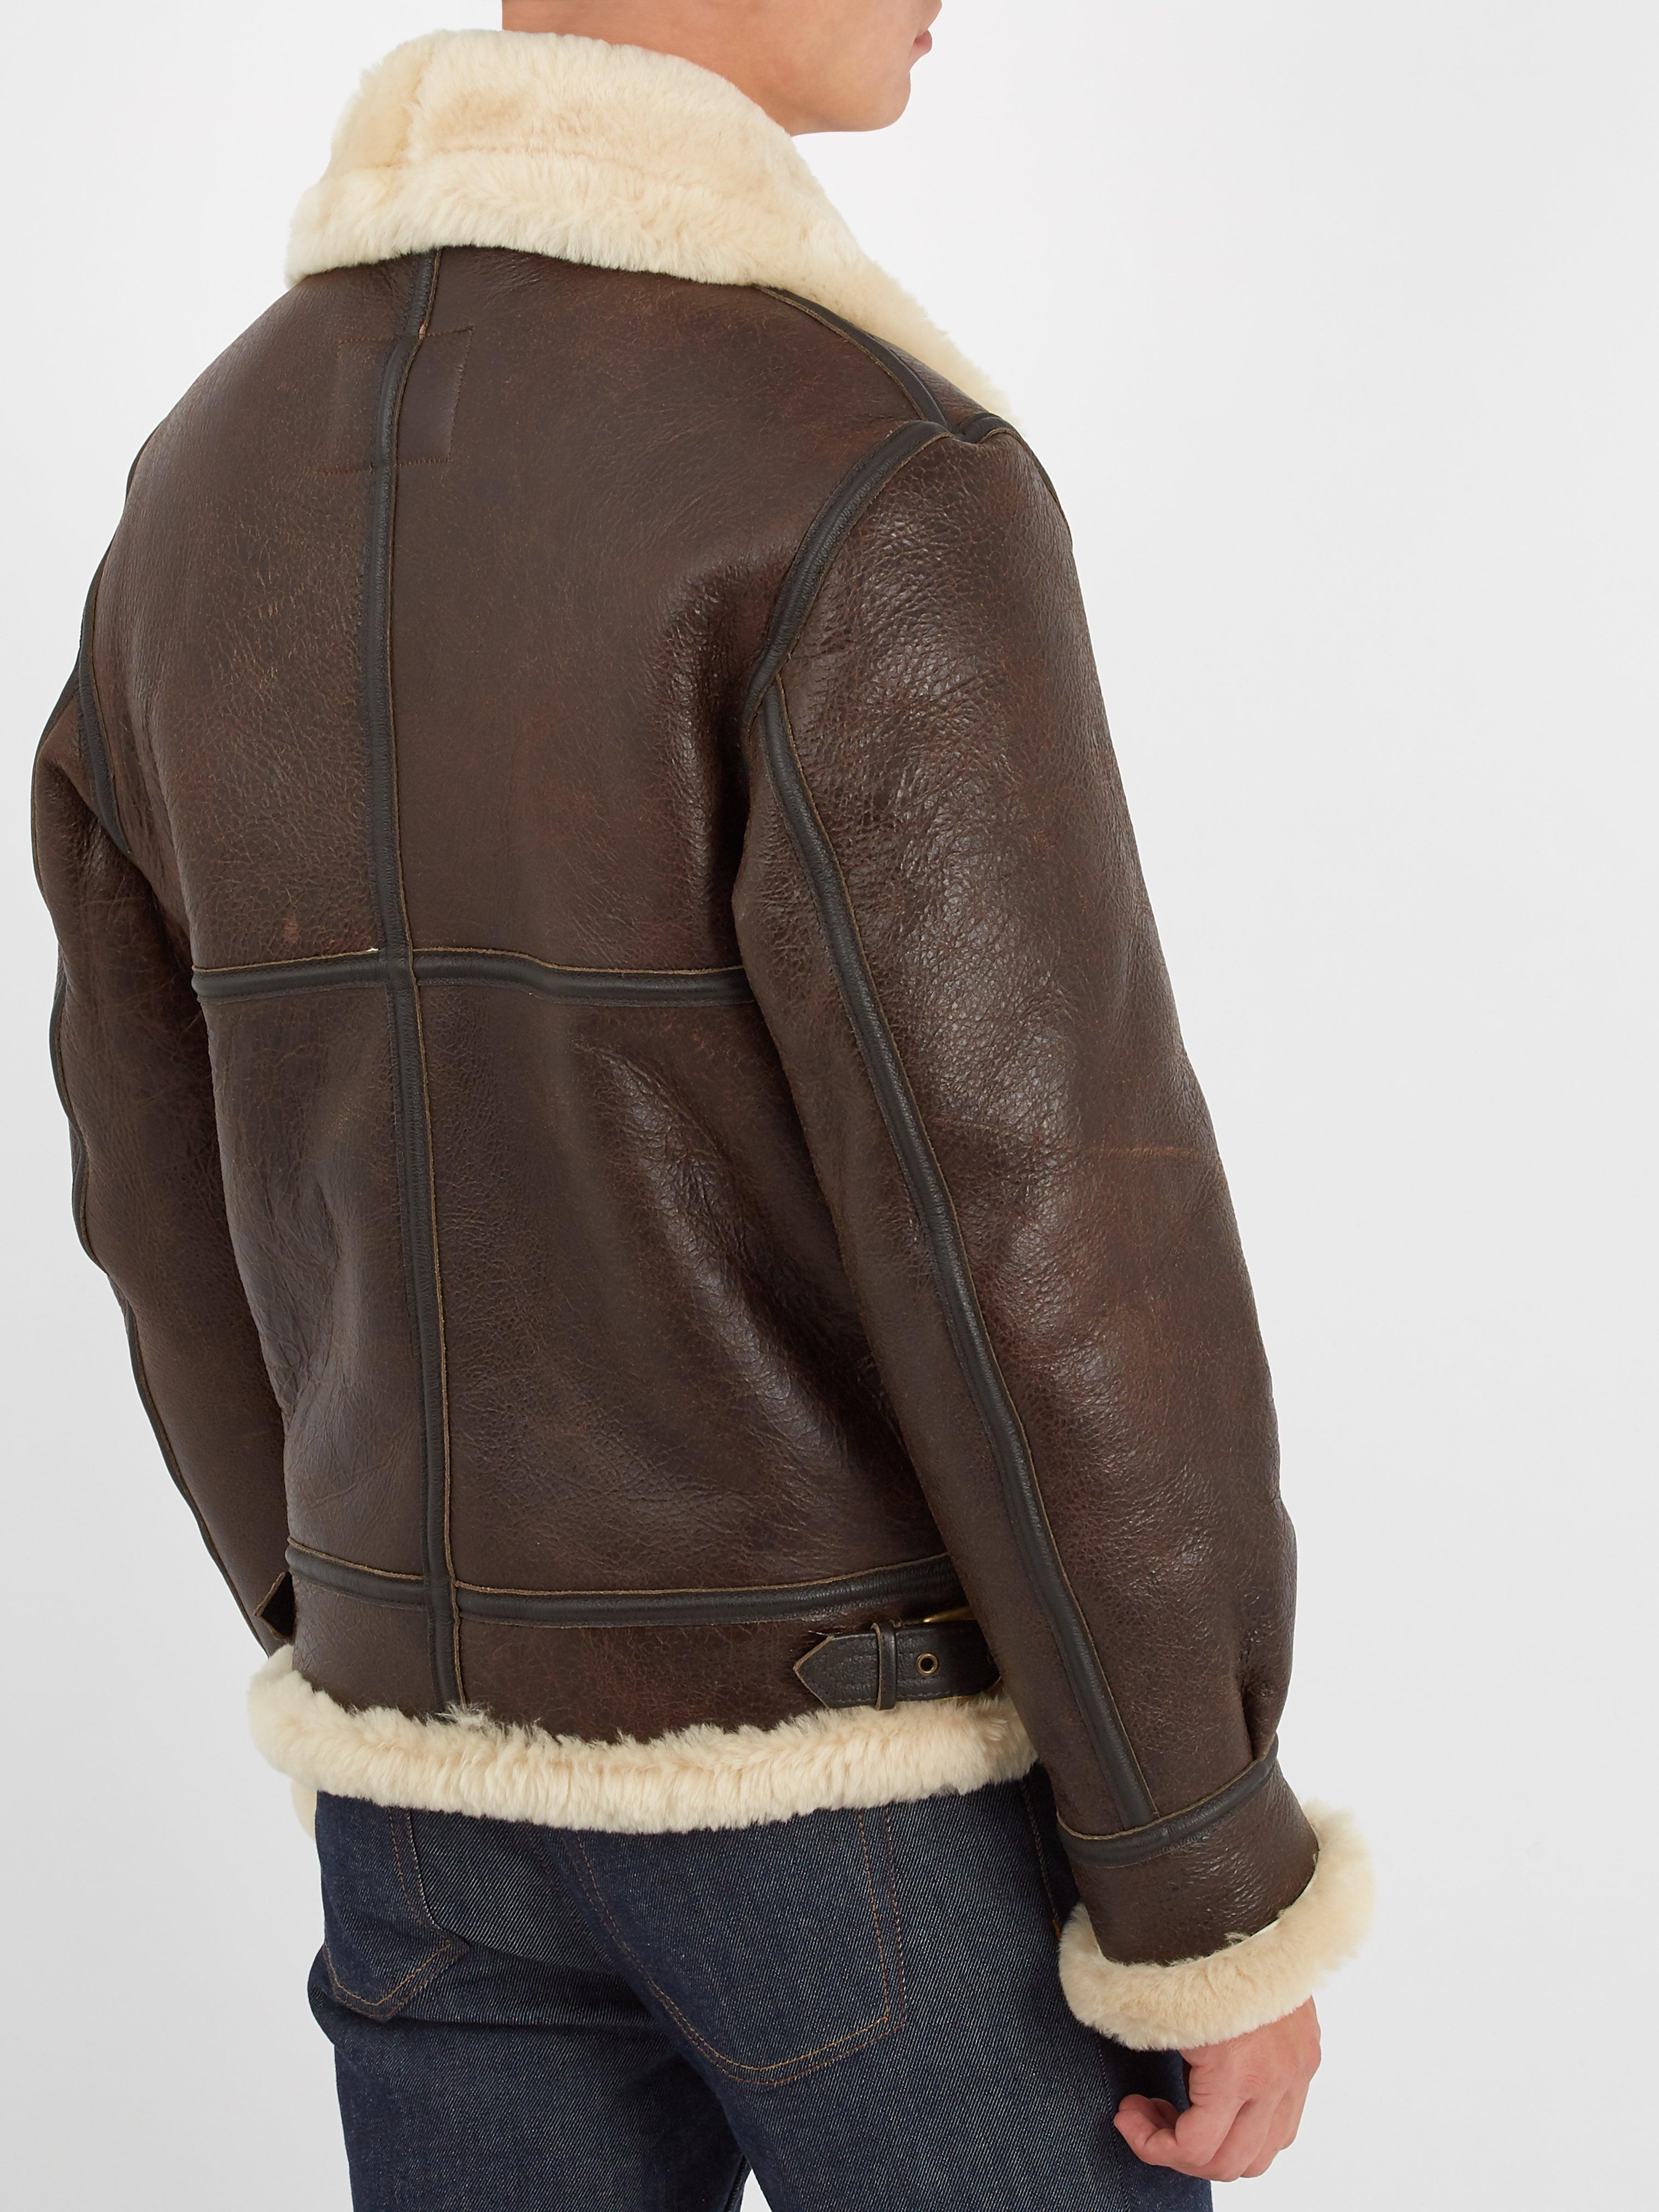 Schott Nyc Military B-3 Shearling-lined Leather Jacket in Brown for Men ...